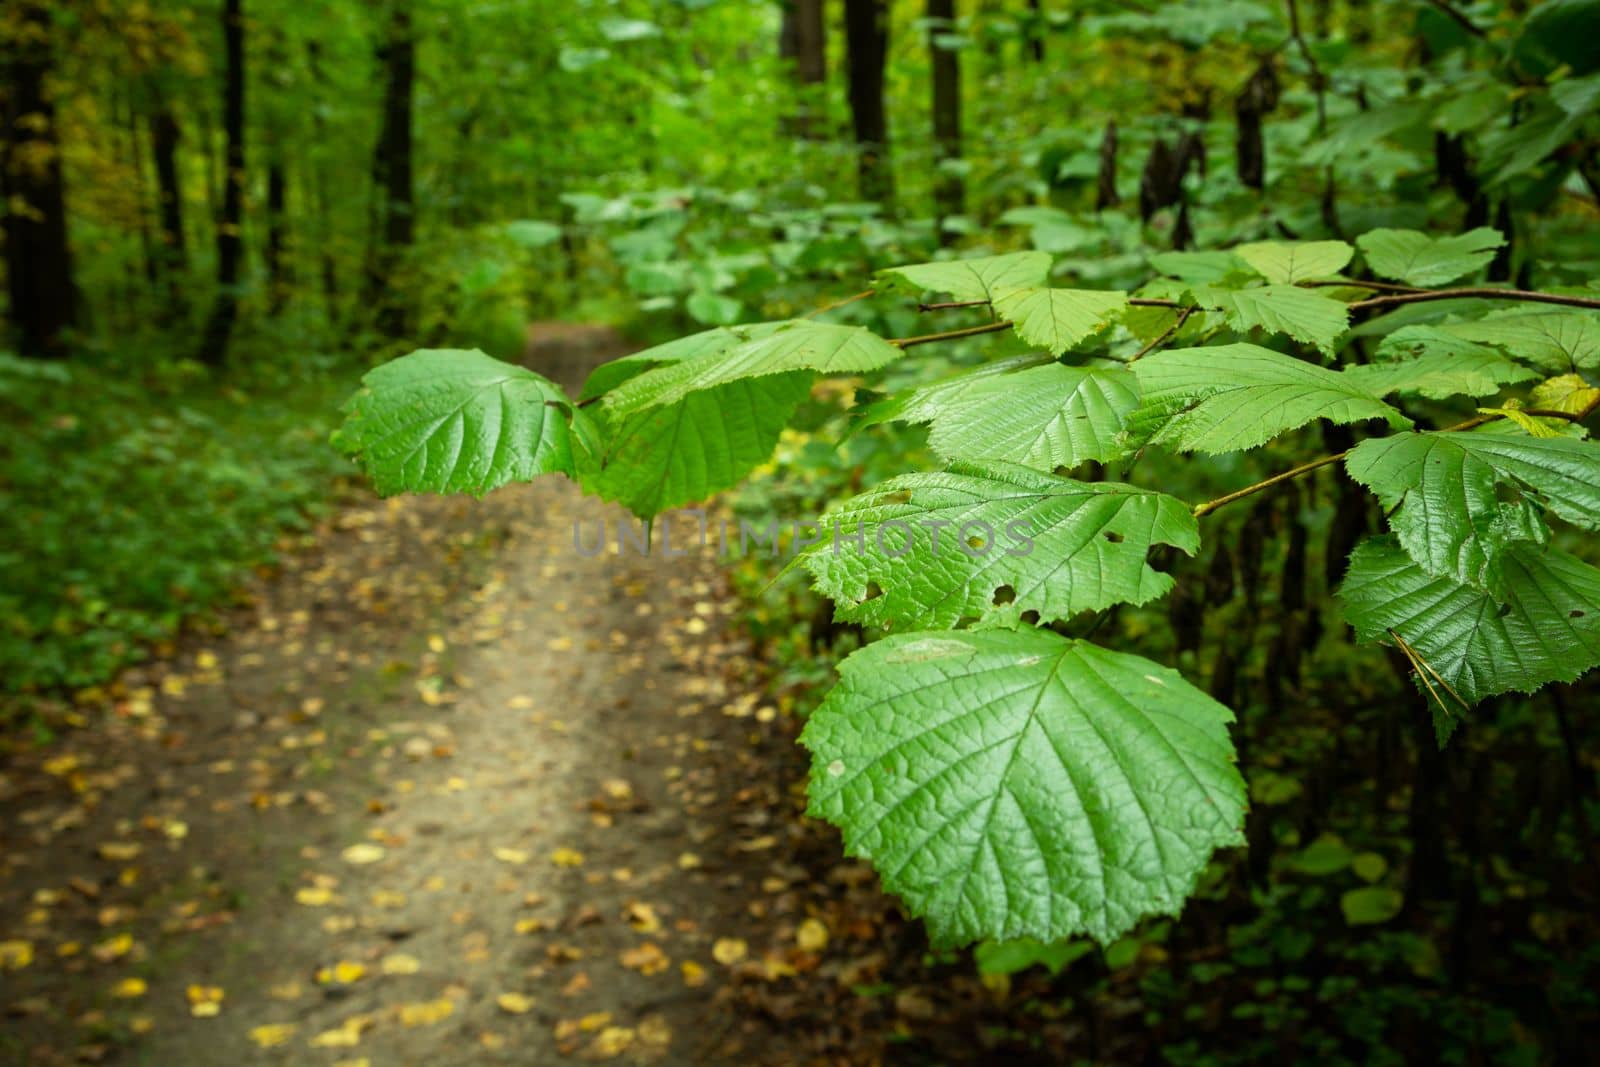 Green alder leaves by the forest pathway